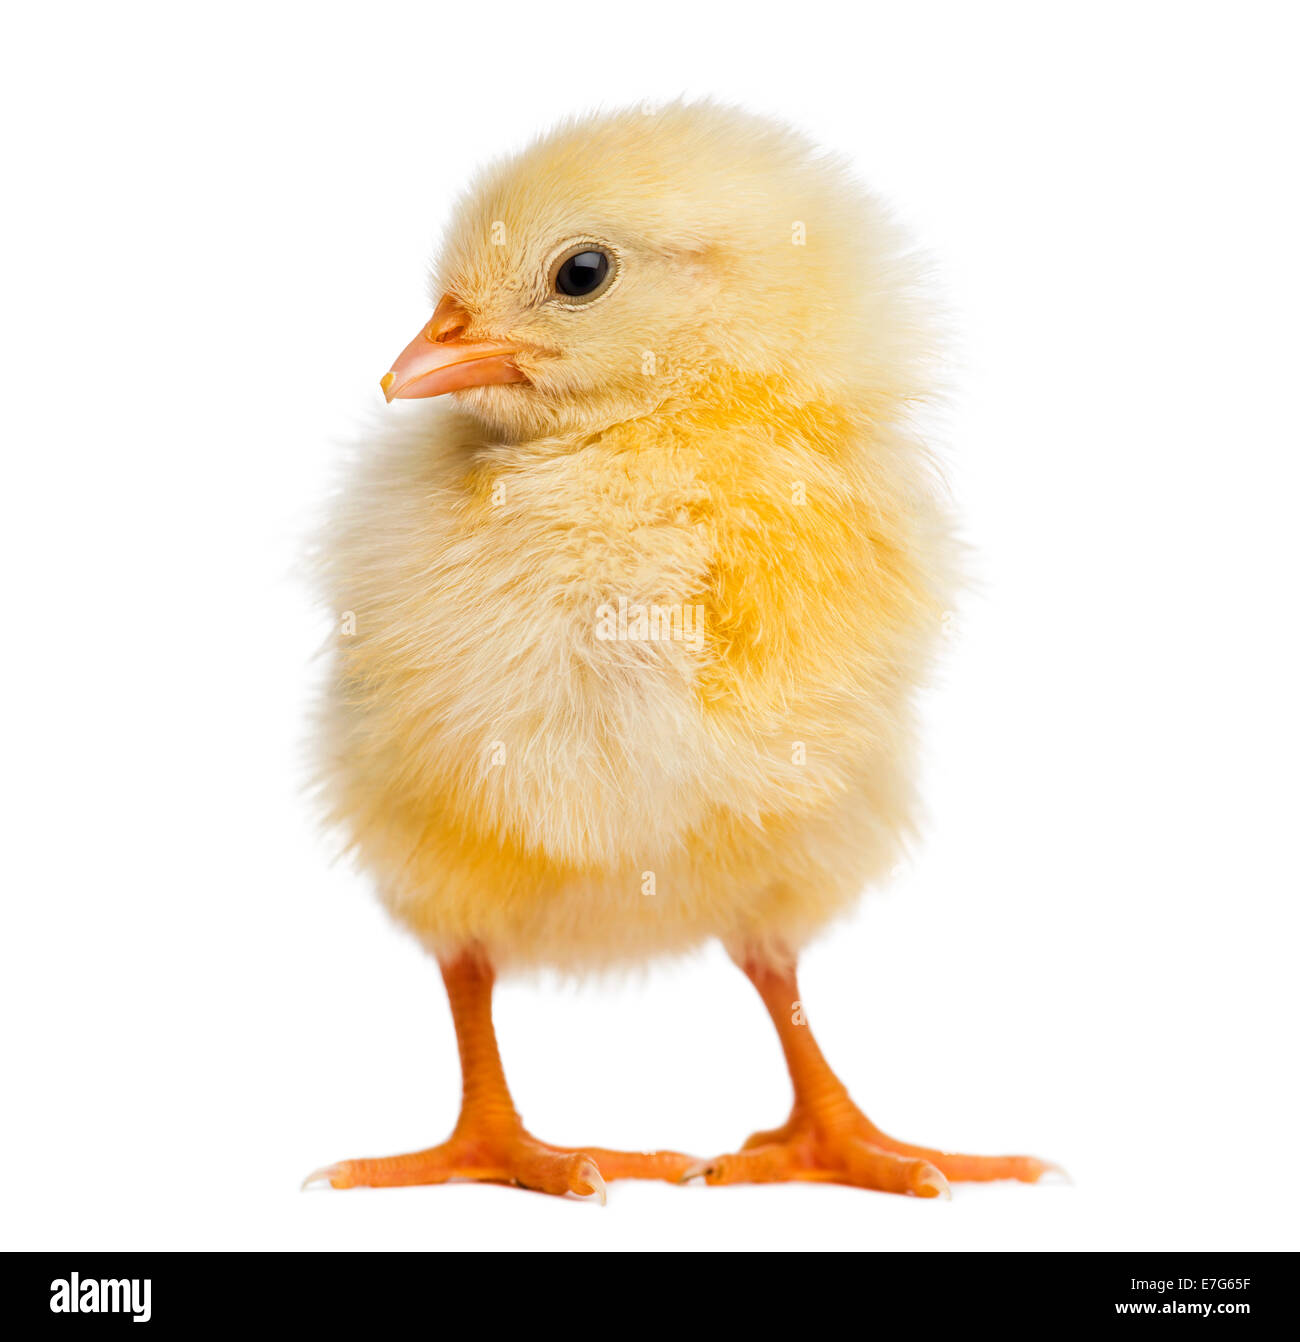 Chick 2 days old, isolated on white Stock Photo